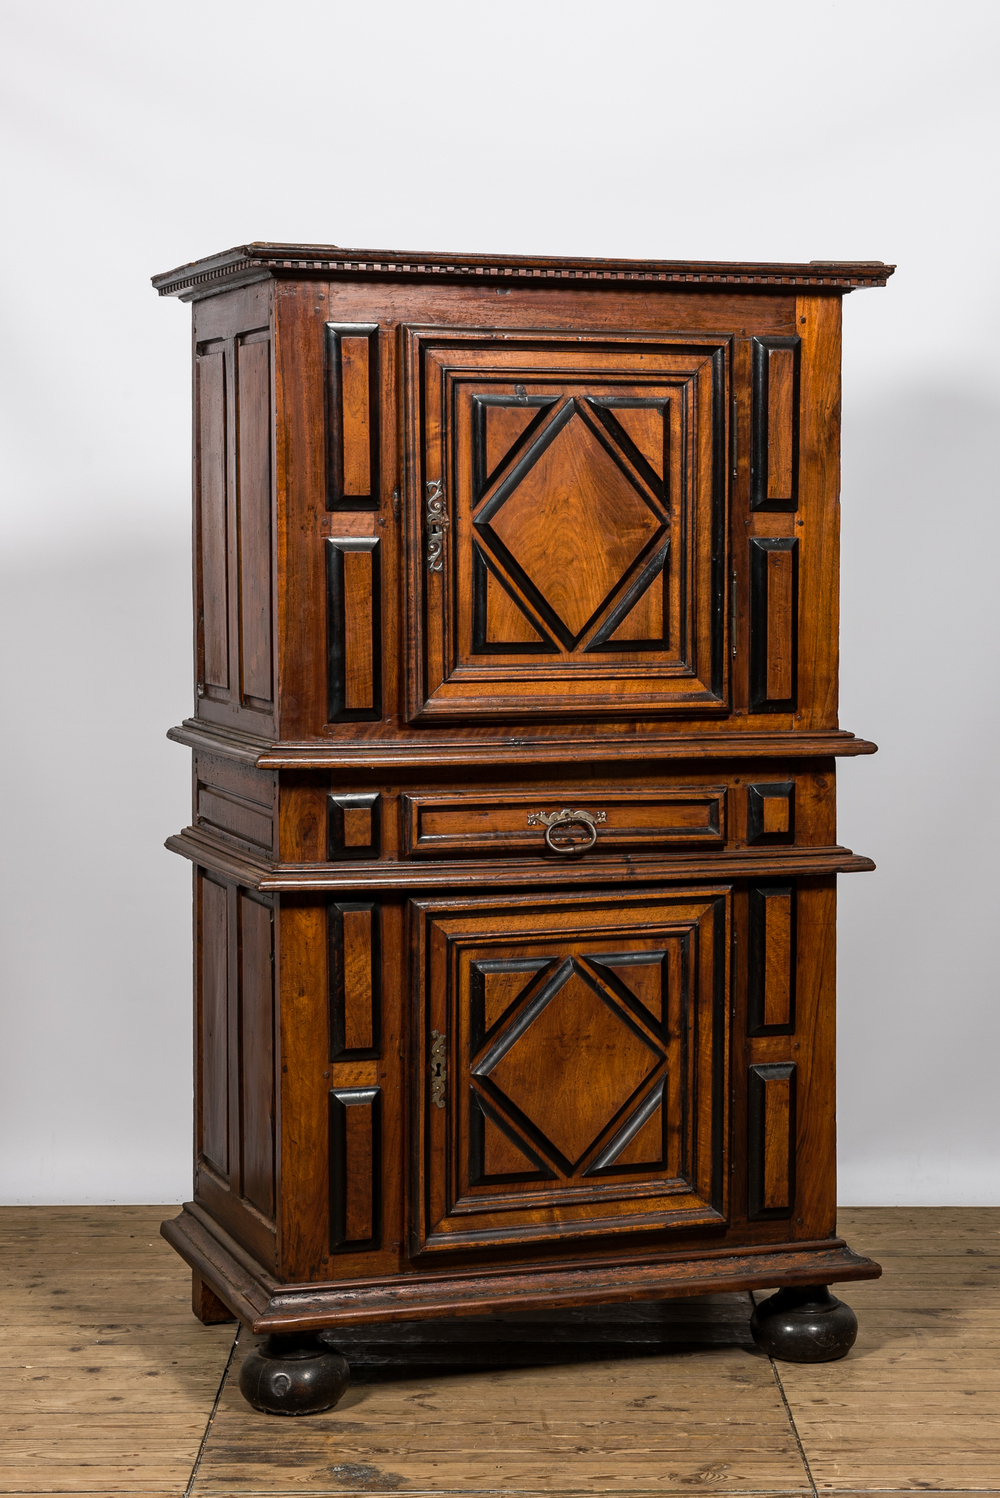 A walnut two-door cabinet with ebonised accents, 17th C.